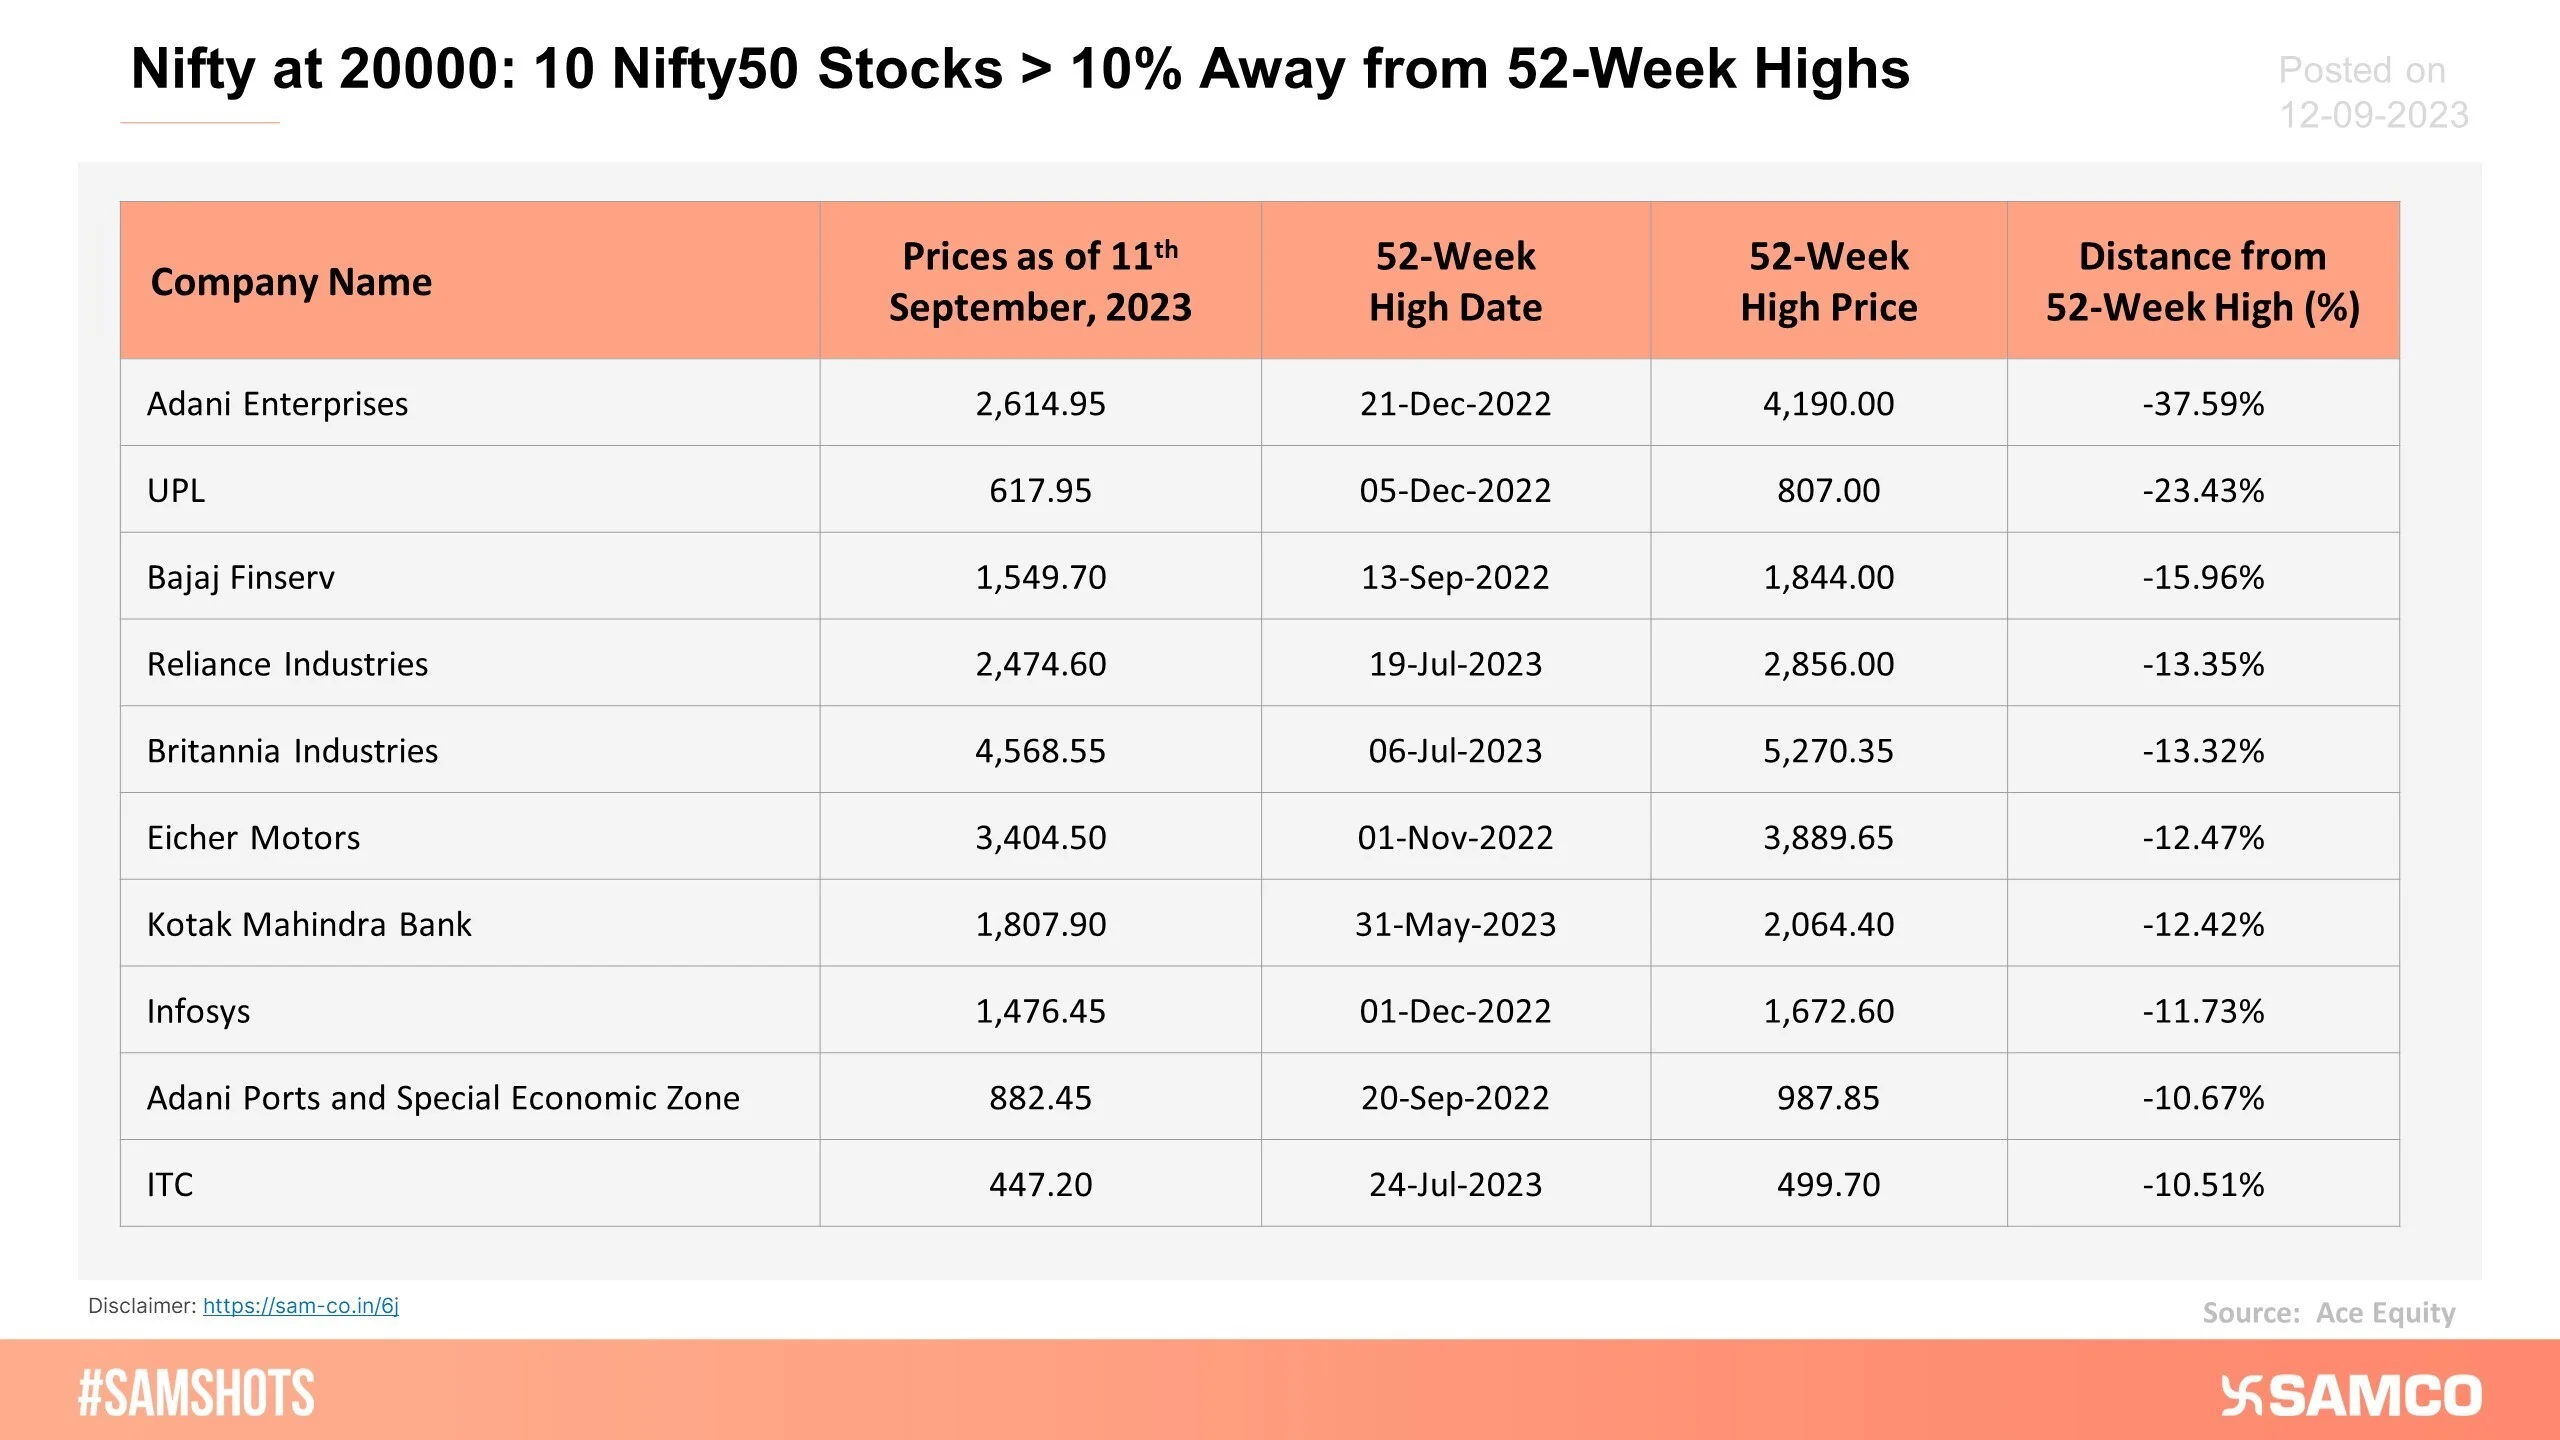 The table below shows a list of 10 Nifty50 stocks that are more than 10% away from their 52-week high